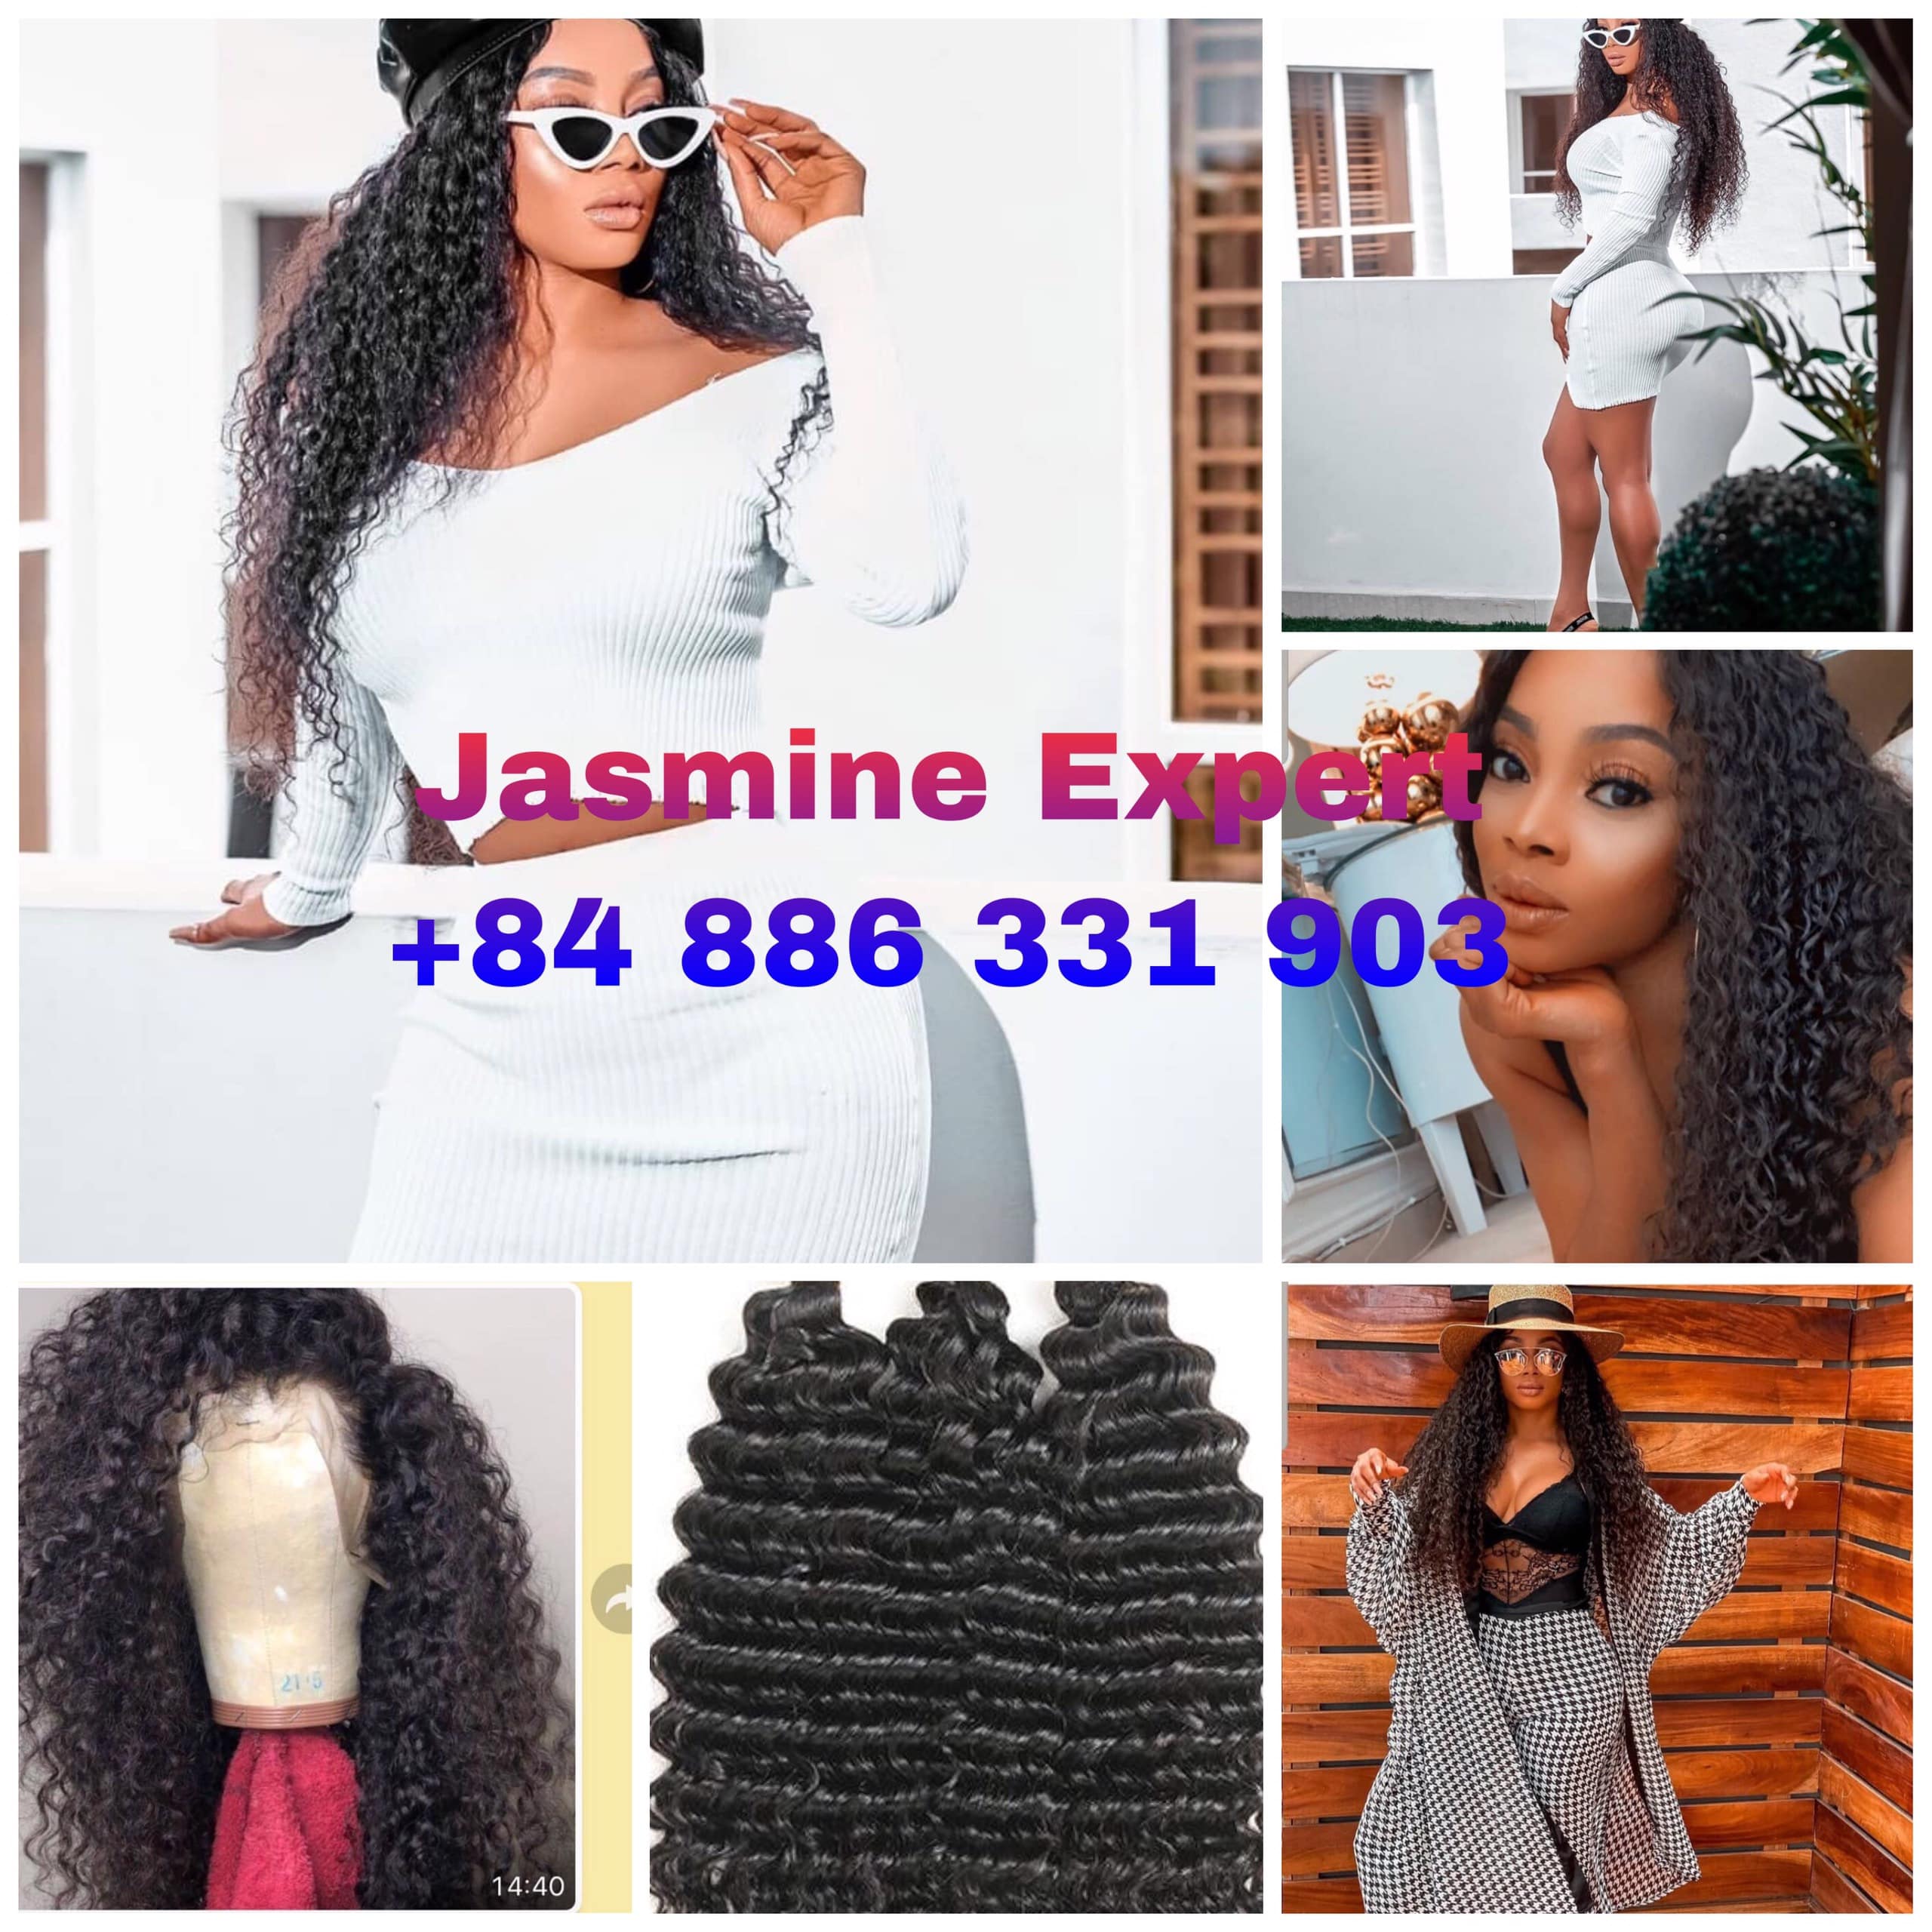 Jerry-hairstyle-top-trendy-hair-2020-for-christmas-season